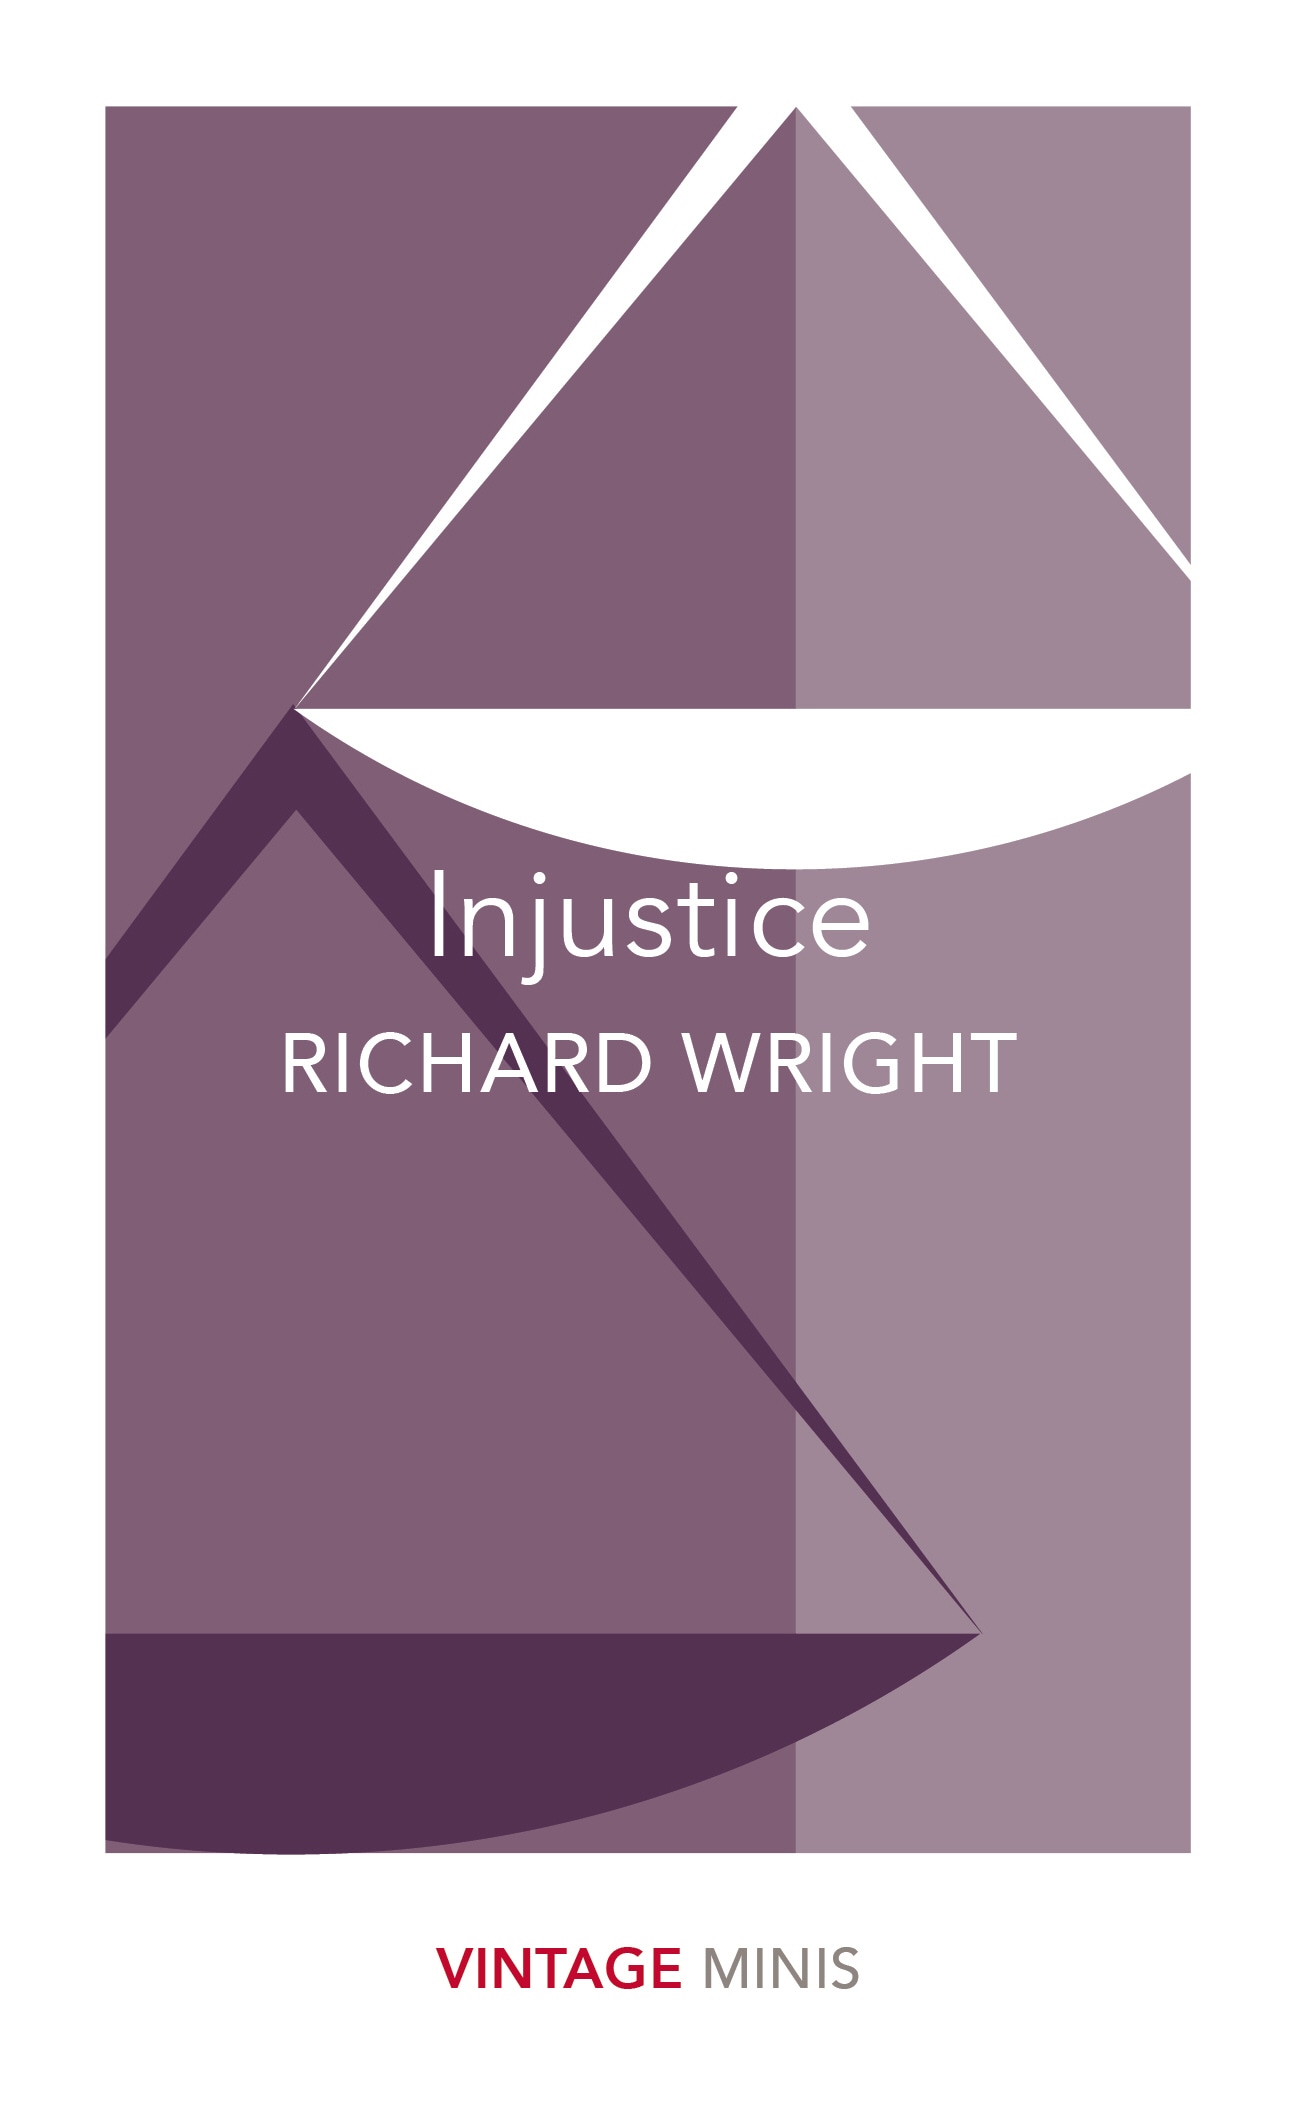 Book “Injustice” by Richard Wright — April 5, 2018